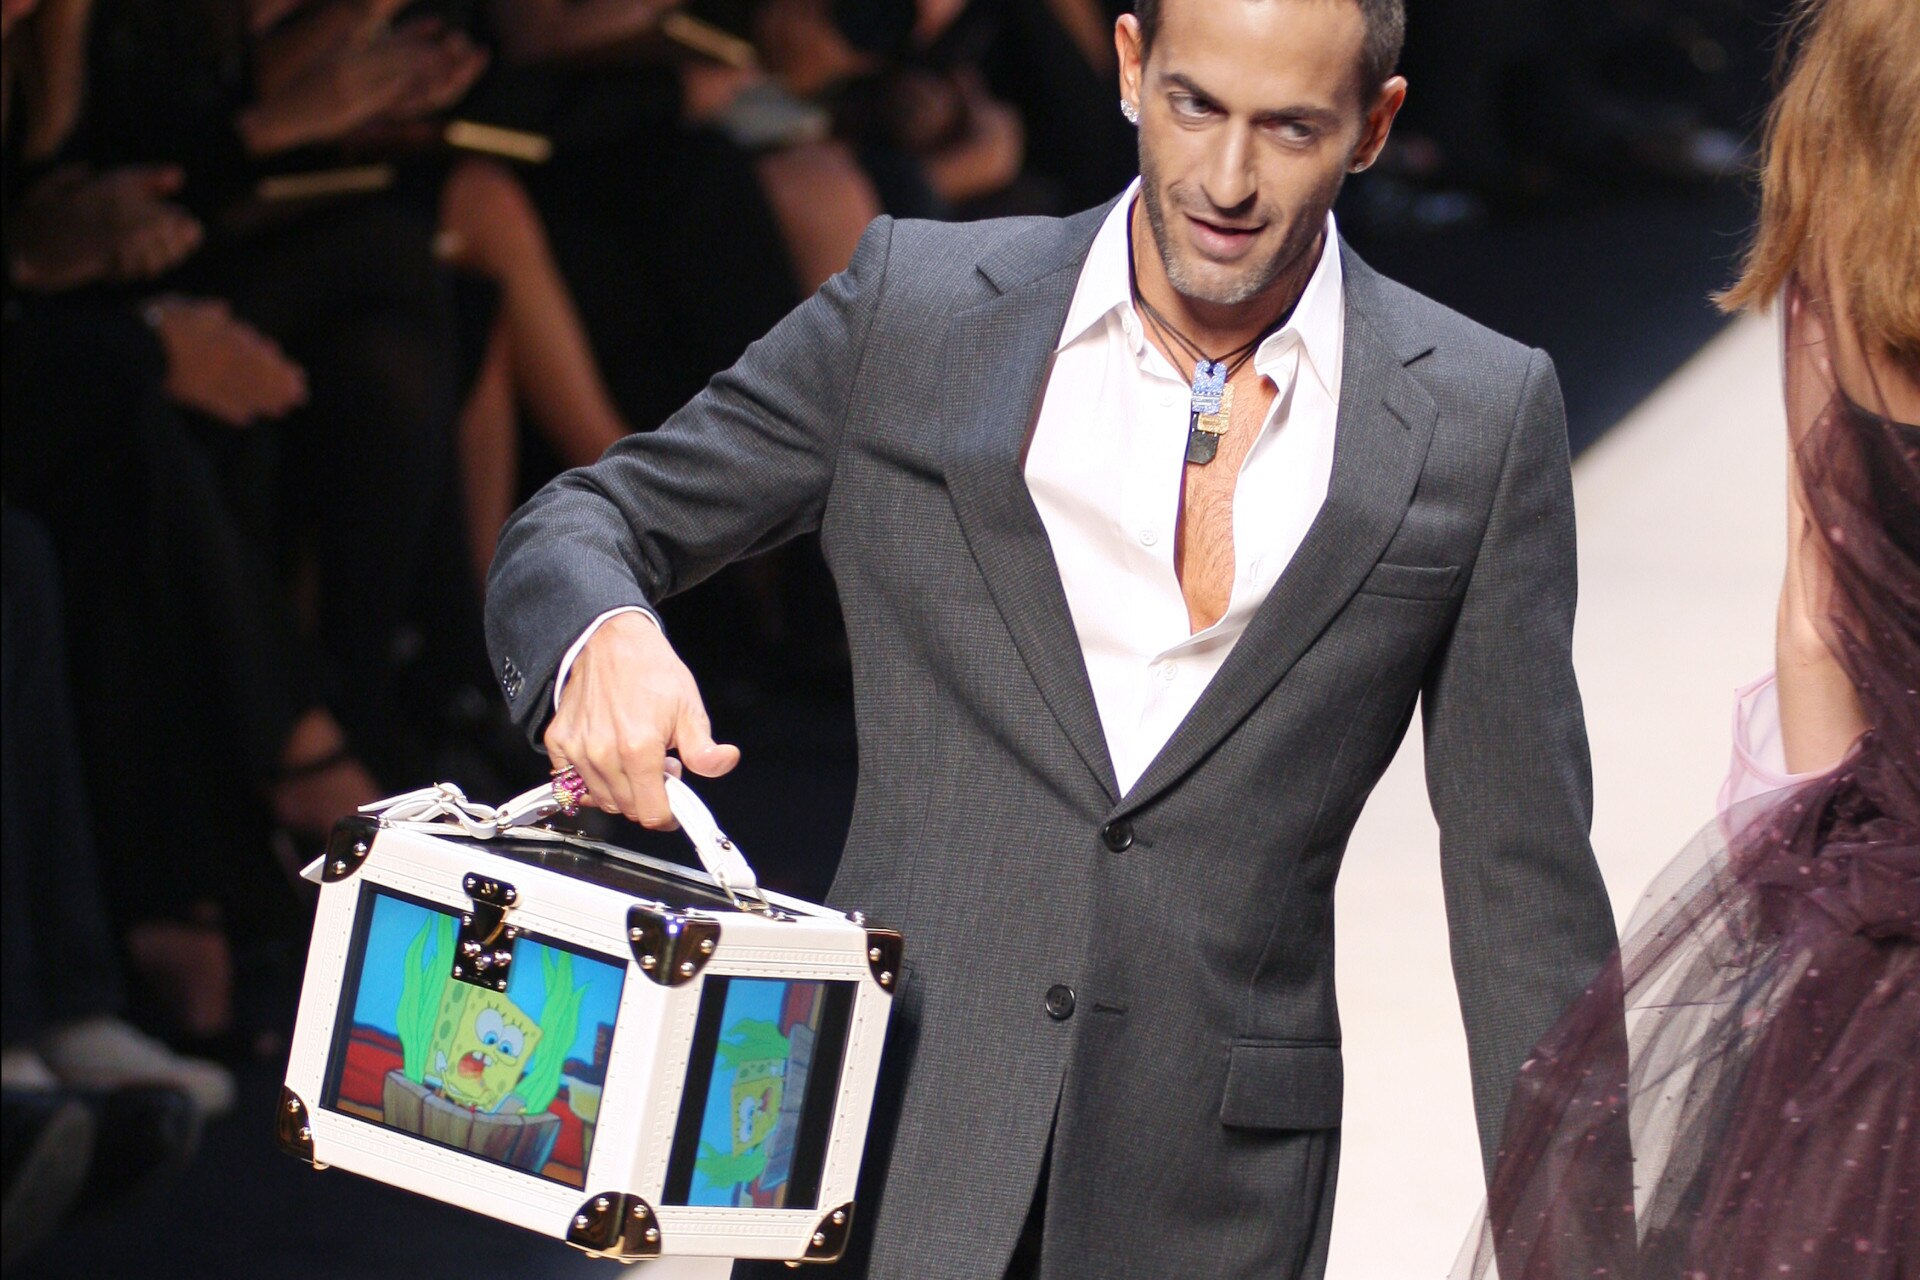 Louis Vuitton Wants to Turn Your Bag Into a TV